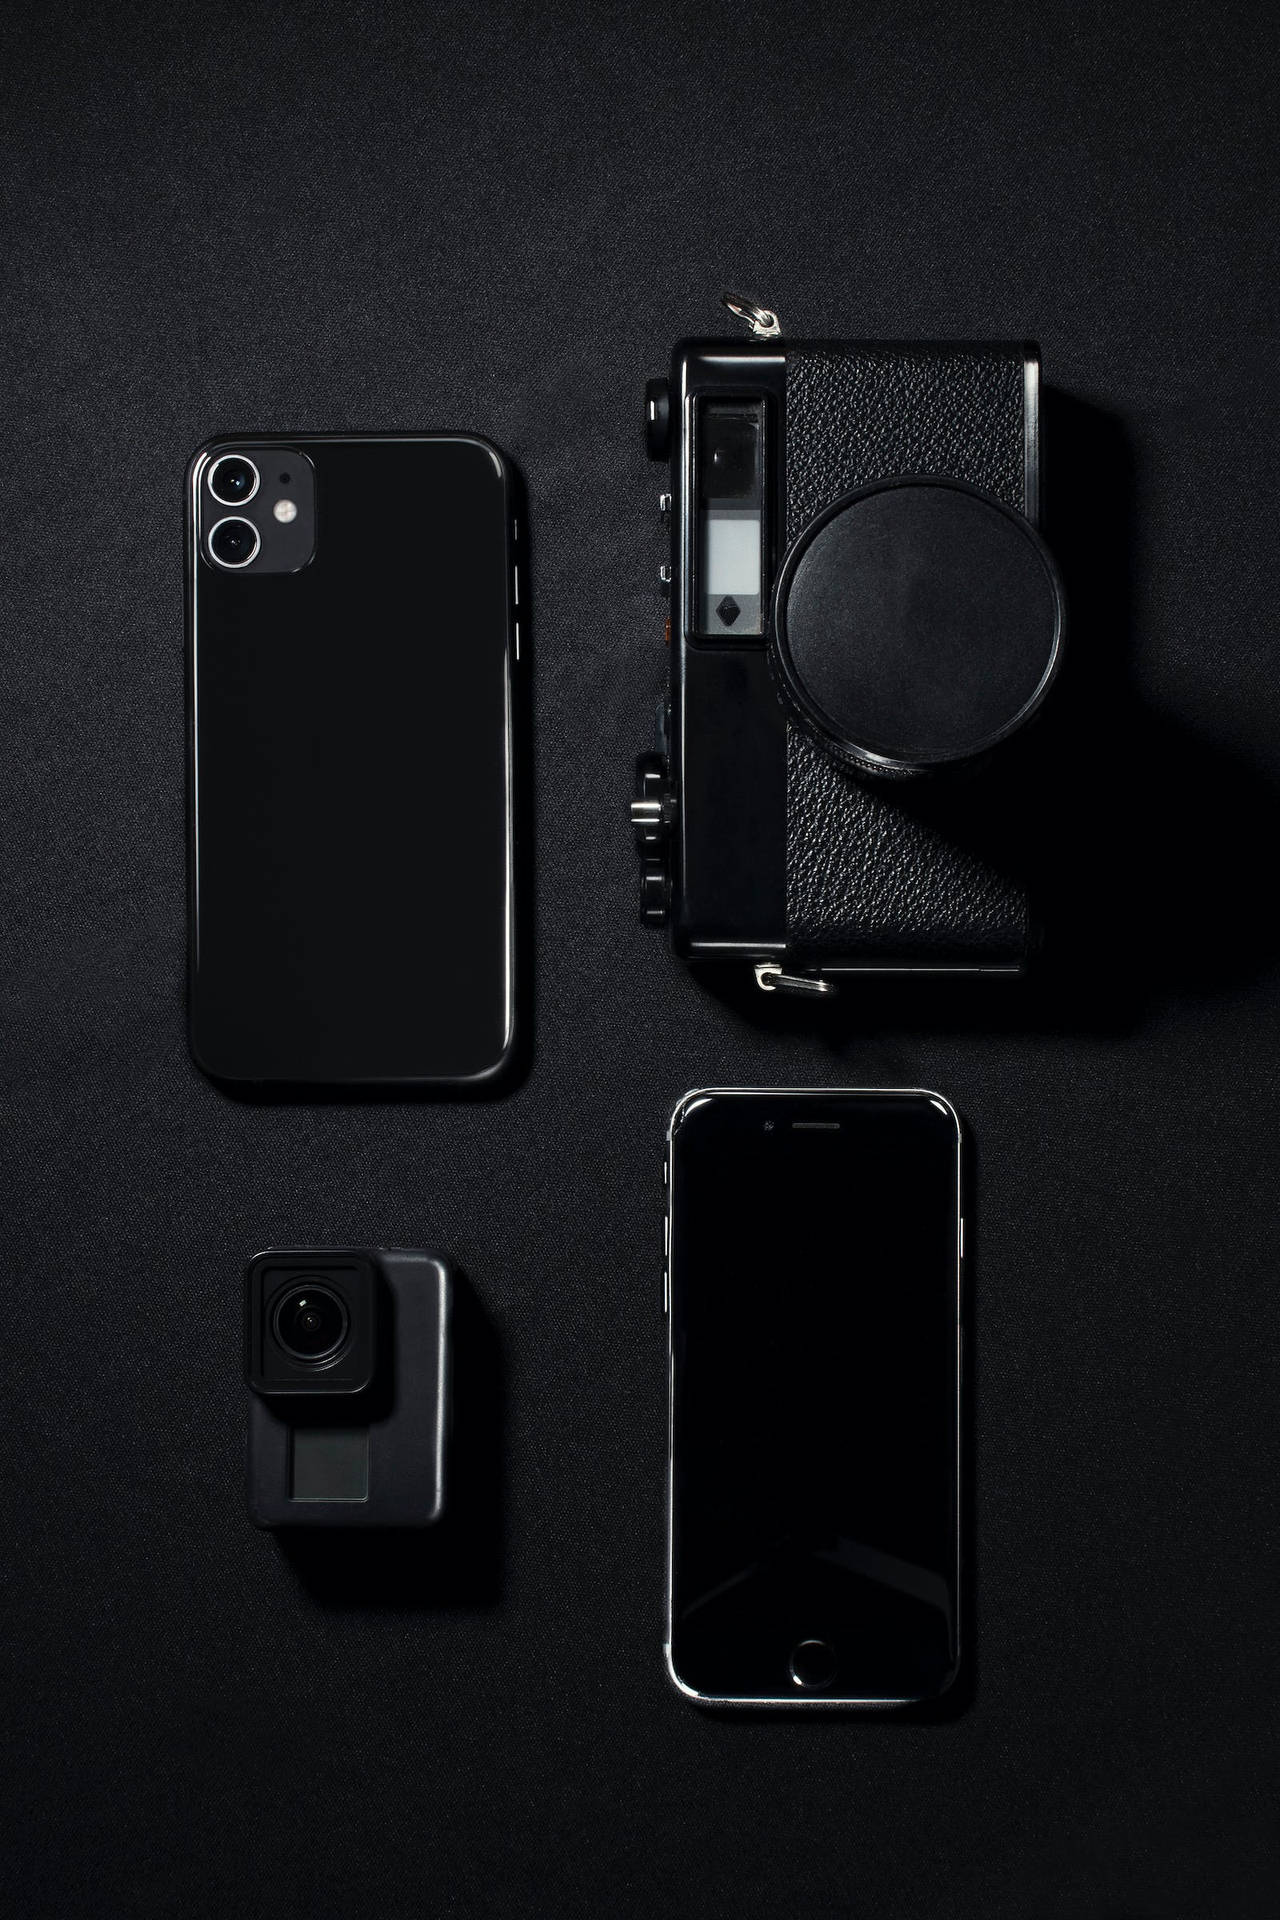 Black Aesthetic iPhone Gadgets Collection Wallpaper